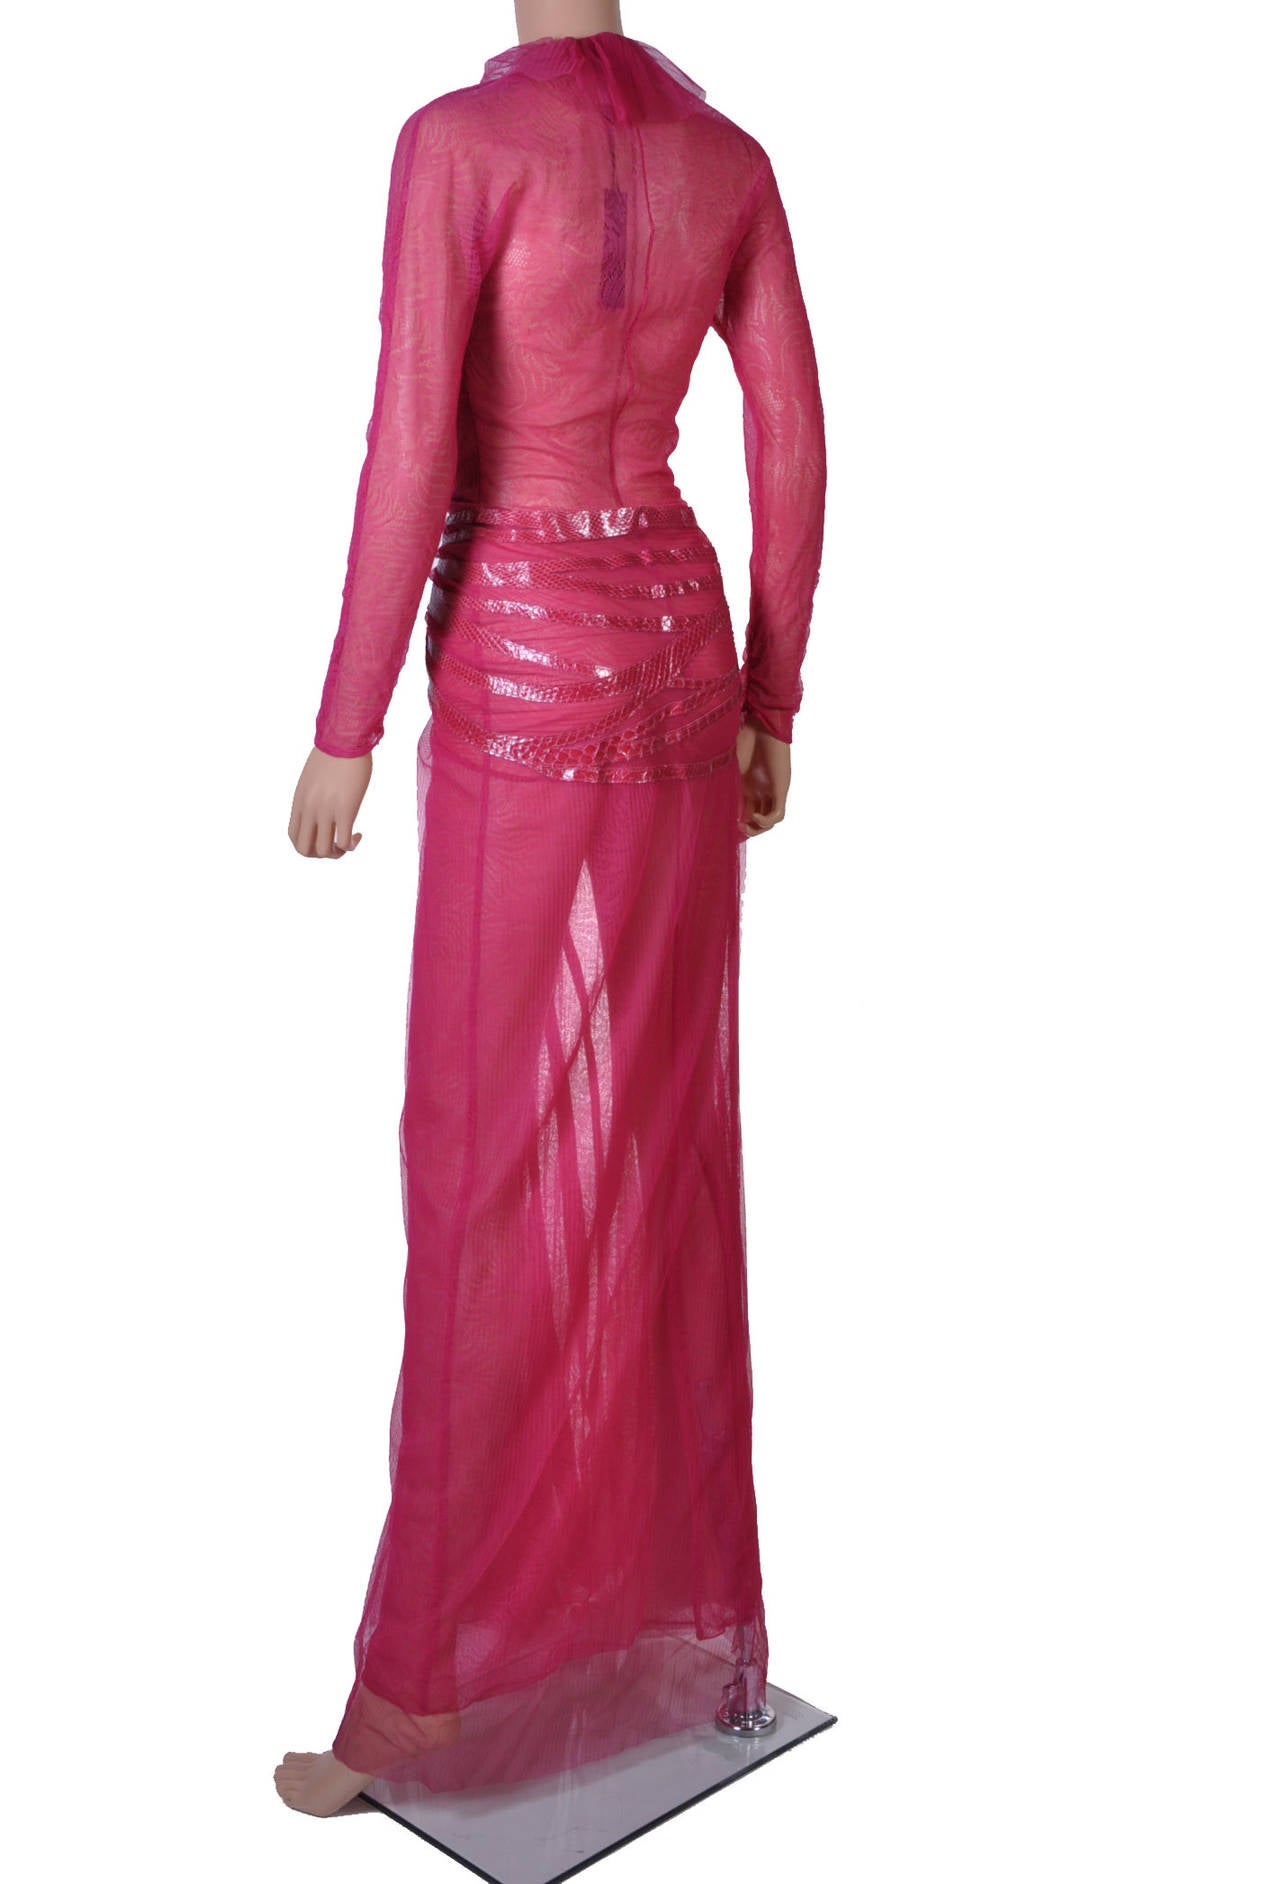 NEW and HIGHLY COLLECTIBLE VERSACE PINK LACE AND SNAKESKIN GOWN 5